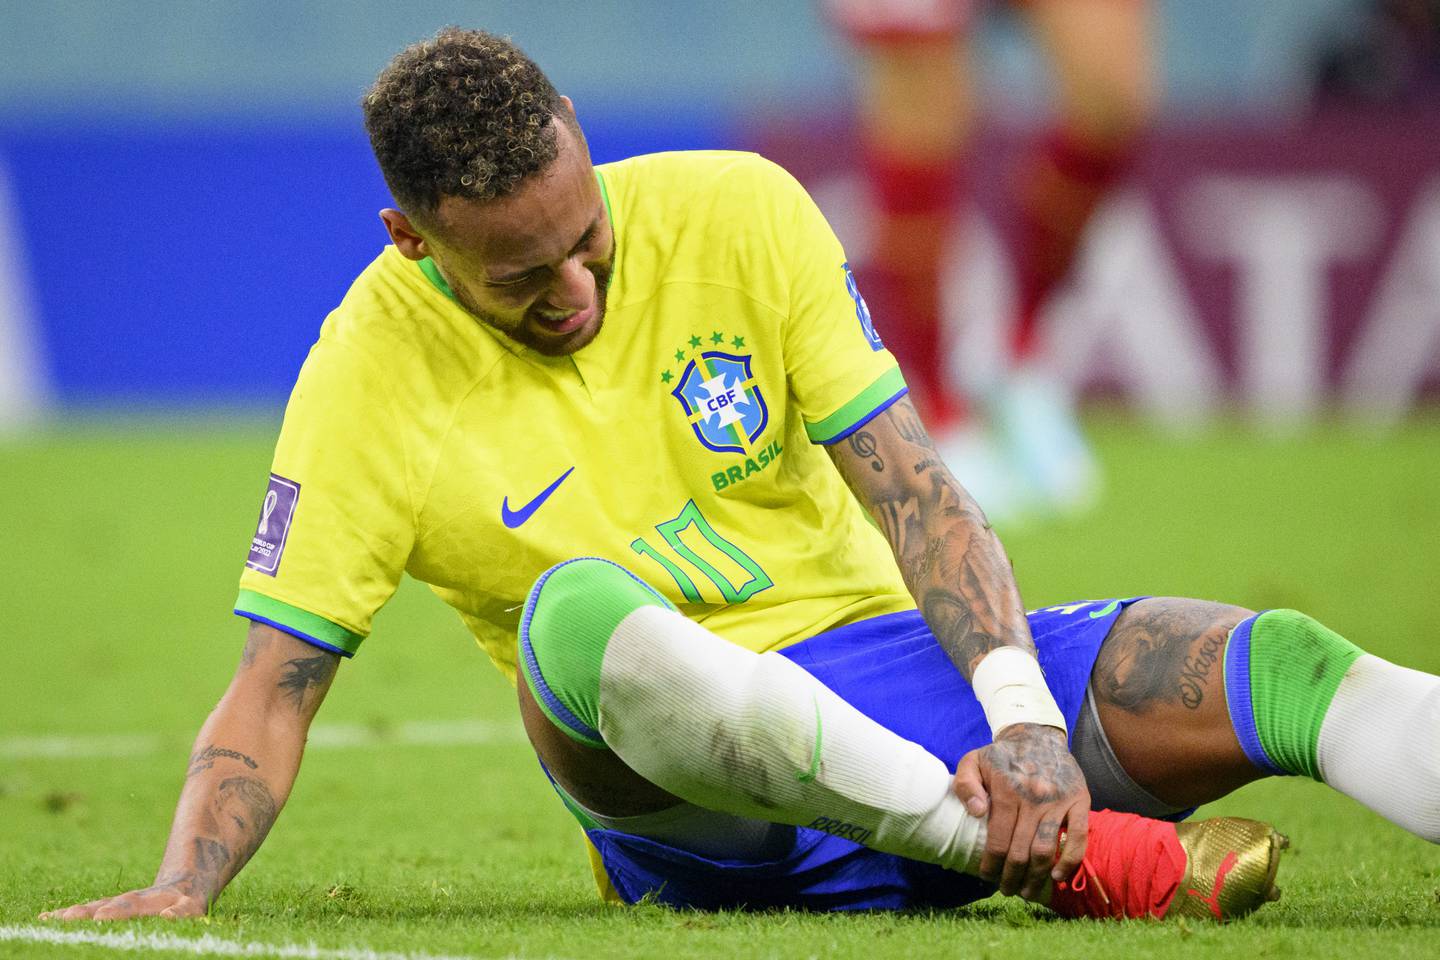 Brazil's Neymar grabs his ankle after an injury during the World Cup group G soccer match between Brazil and Serbia, at the the Lusail Stadium in Lusail, Qatar on Thursday, Nov.  24, 2022.  (Laurent Gillieron / Keystone via AP)